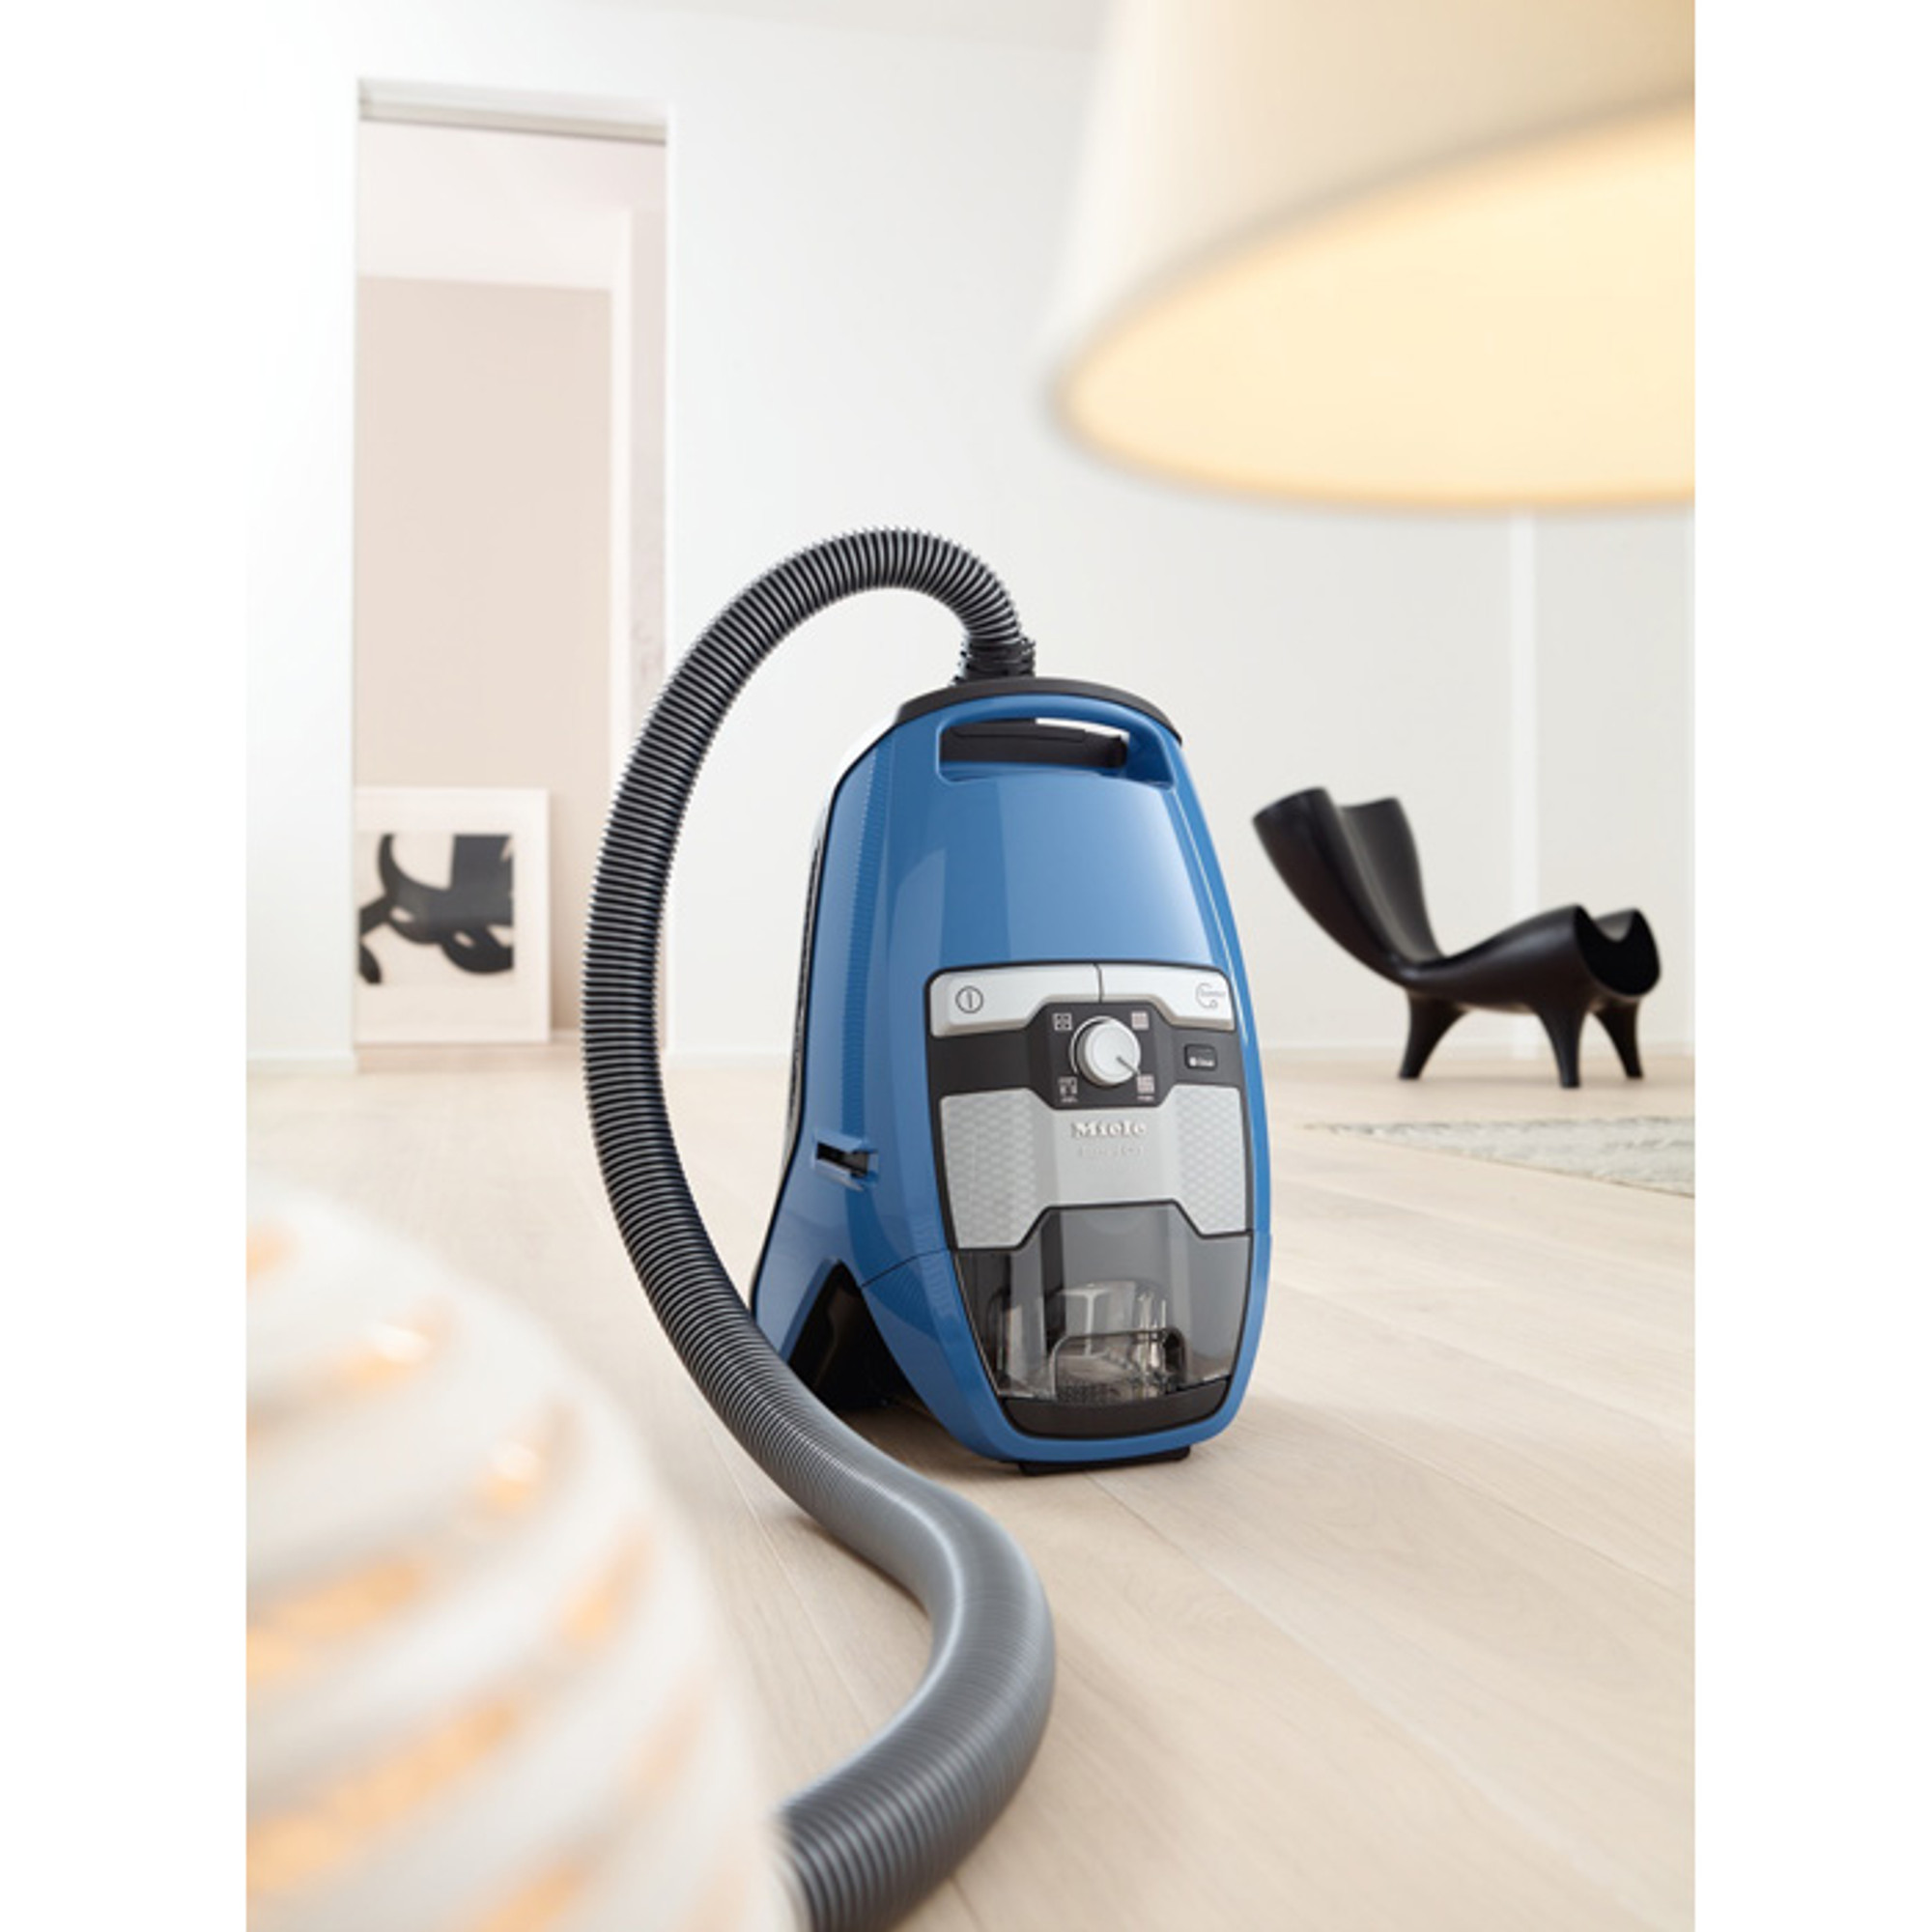 Buy Blizzard CX1 Total Care Canister Vacuum from Canada at McHardyVac.com